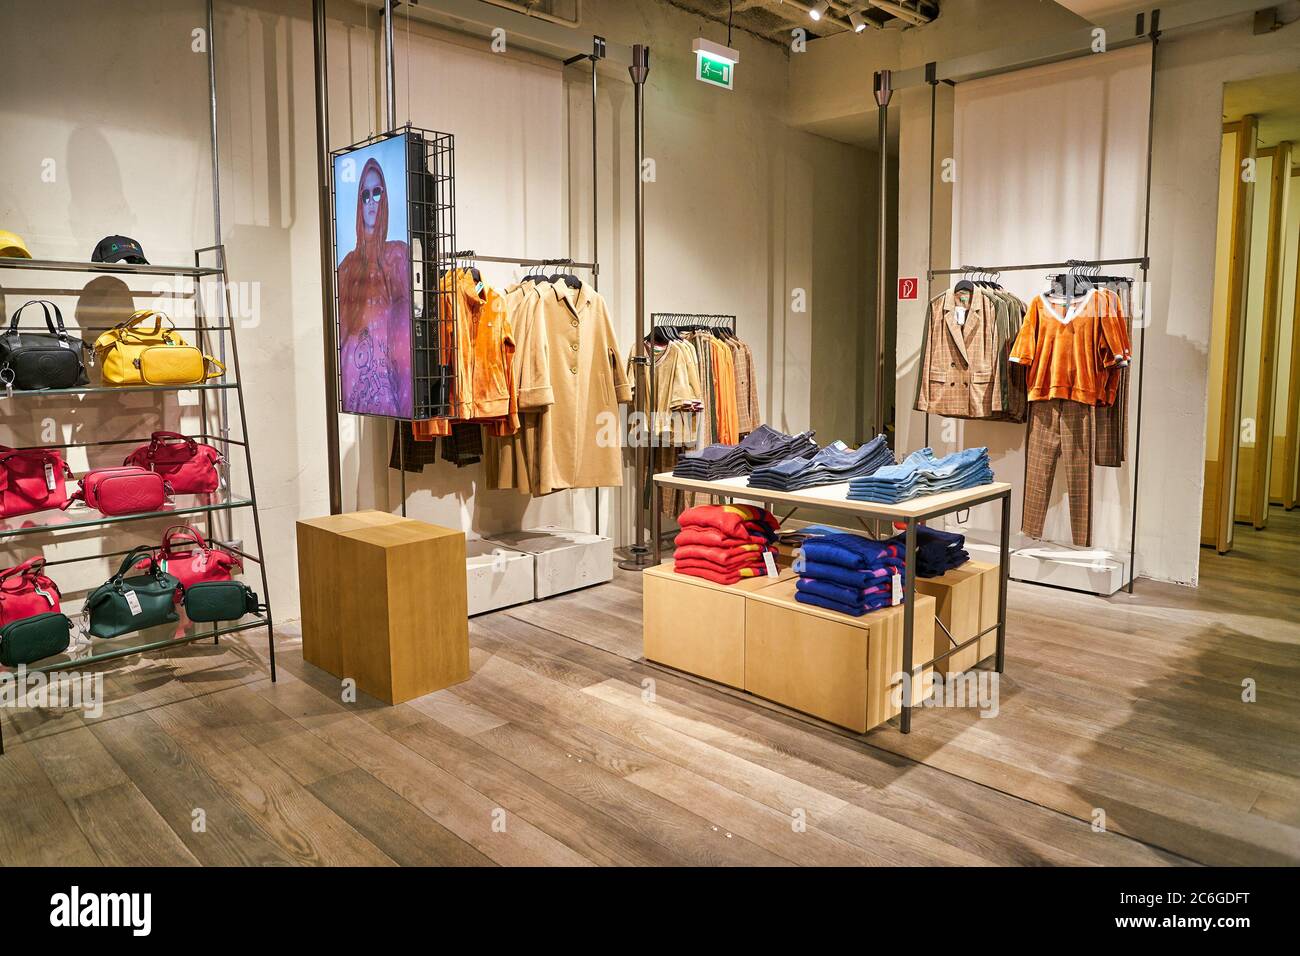 BERLIN, GERMANY - CIRCA SEPTEMBER, 2019: interior shot of United Colors of Benetton store in Berlin. Stock Photo